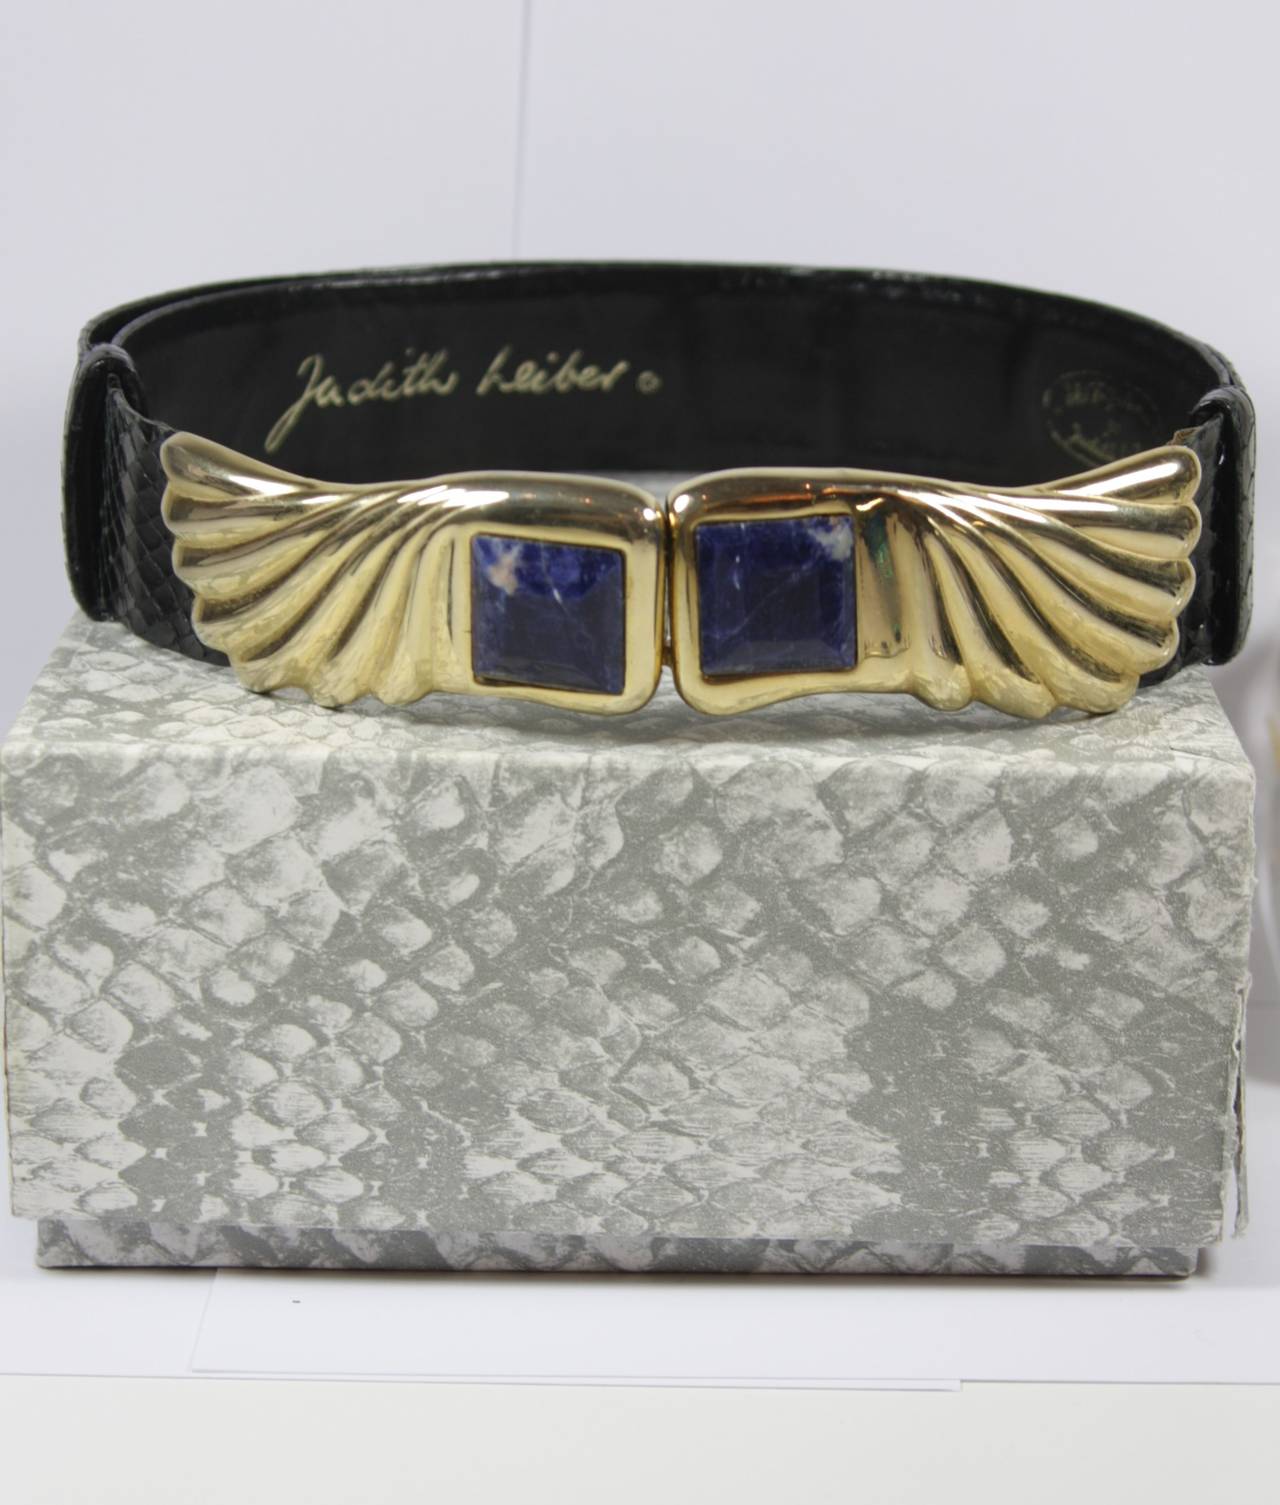 Judith Leiber Black Snakeskin Belt with Gold Buckle and Blue Stone 2